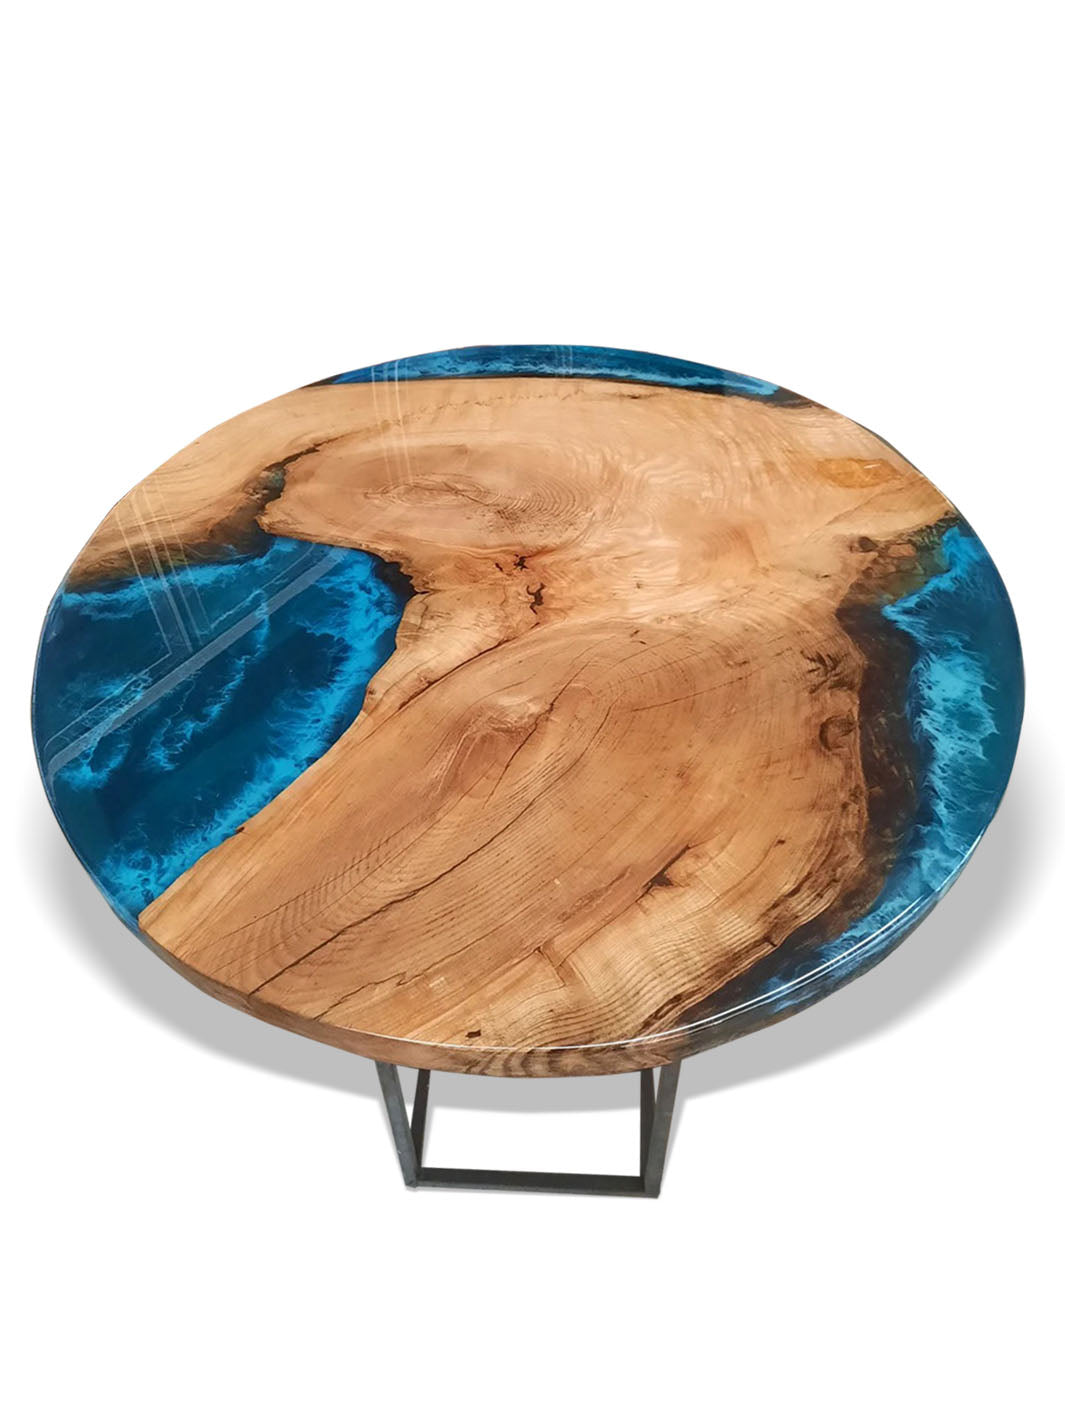 Handcrafted Epoxy Resin Rounded Table | Multiple Size Options DaddyO's table legs DAD1002